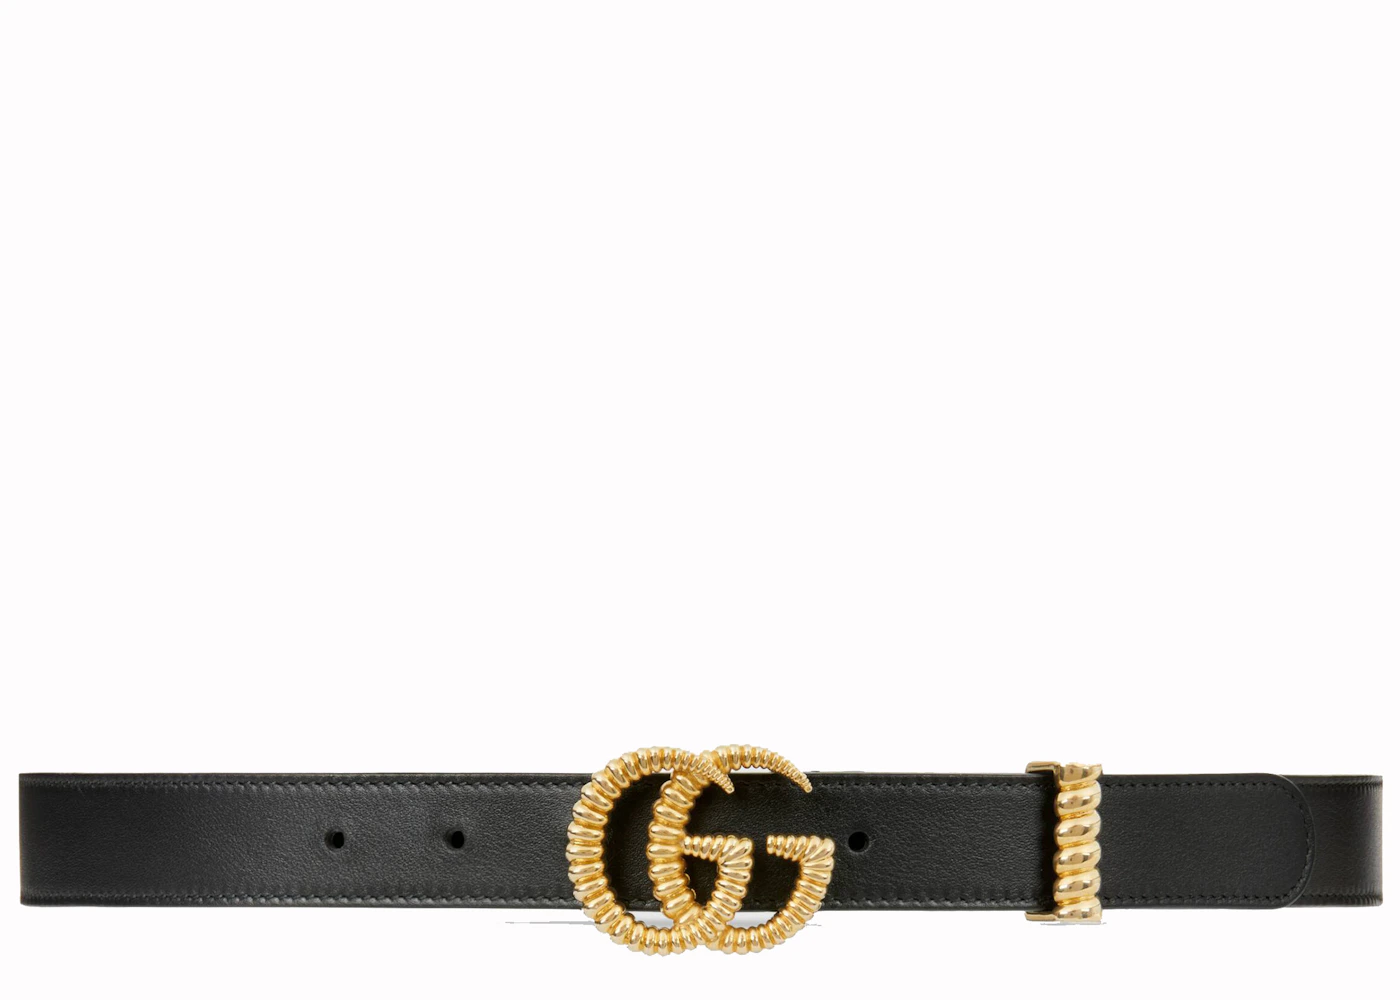 Gucci - Authenticated GG Buckle Belt - Leather Black Plain for Women, Never Worn